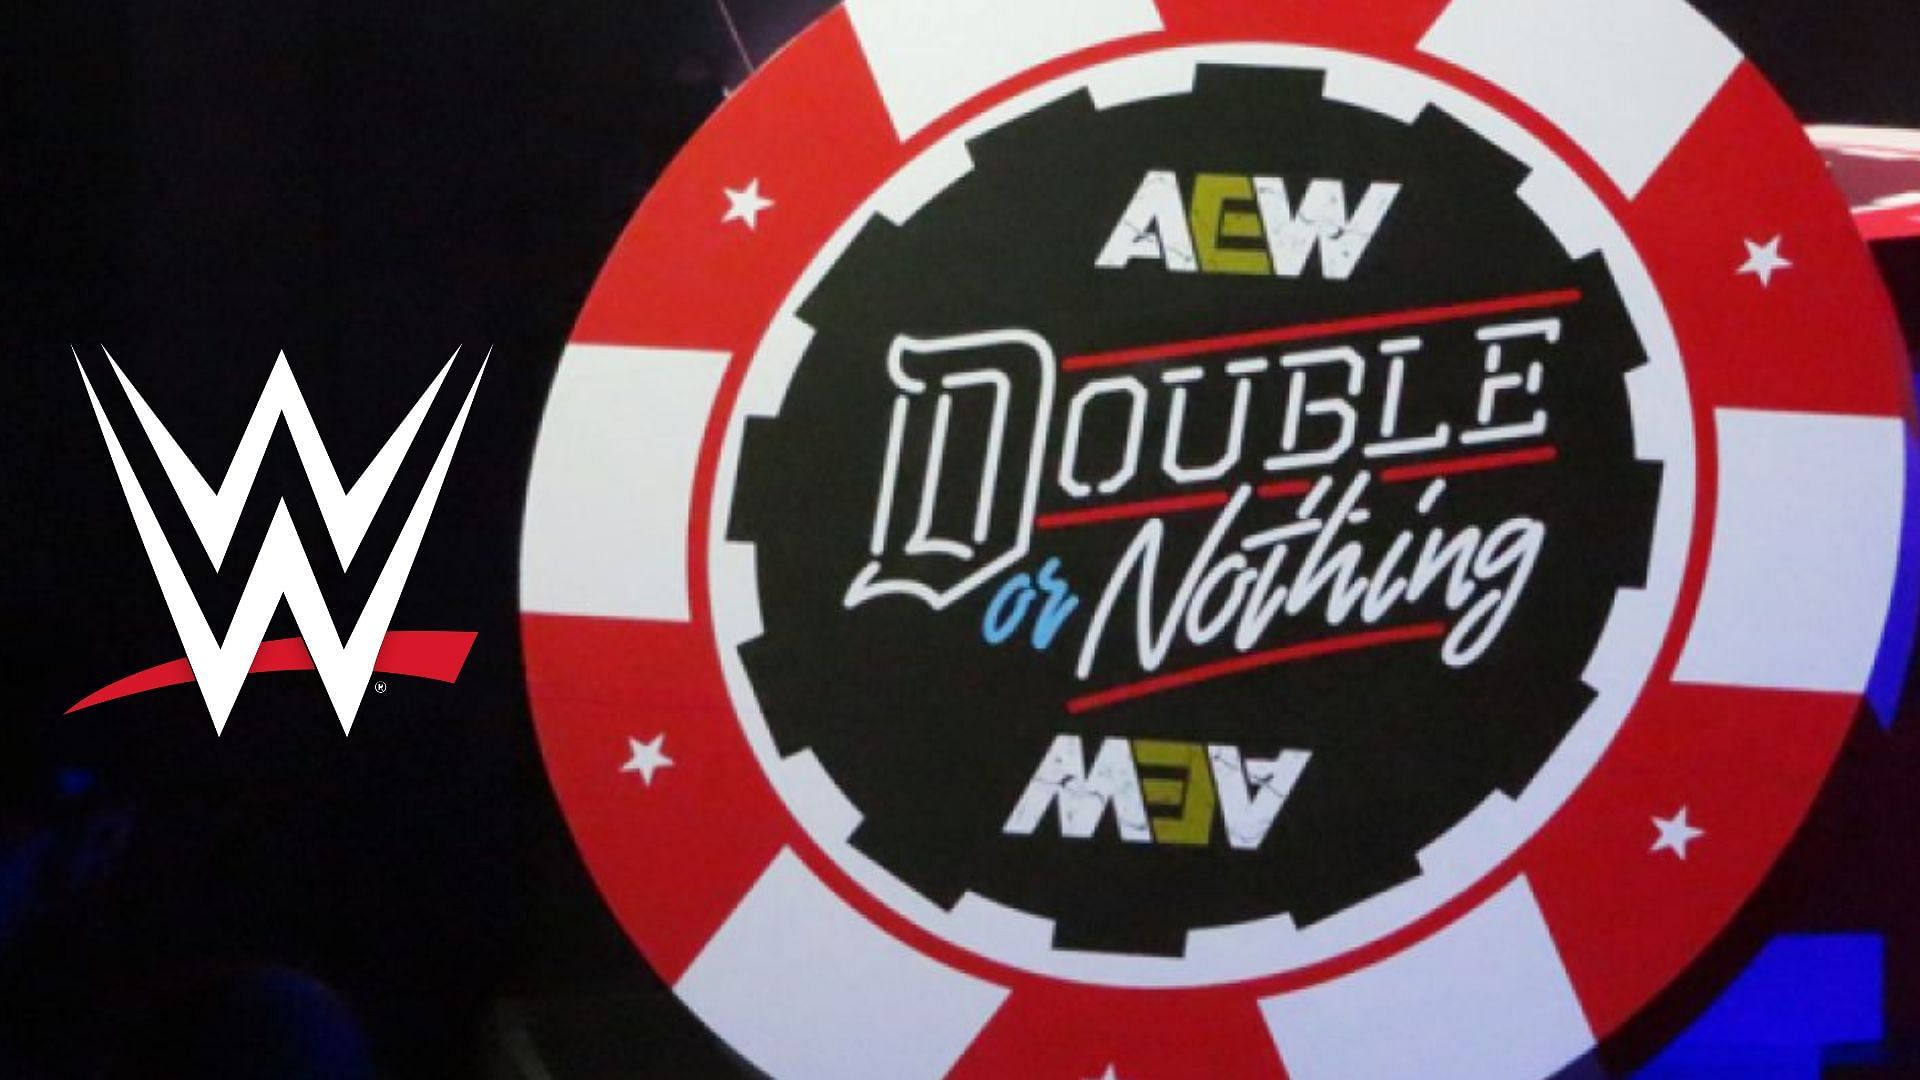 Which former WWE Superstar will challenge be at AEW Double or Nothing?